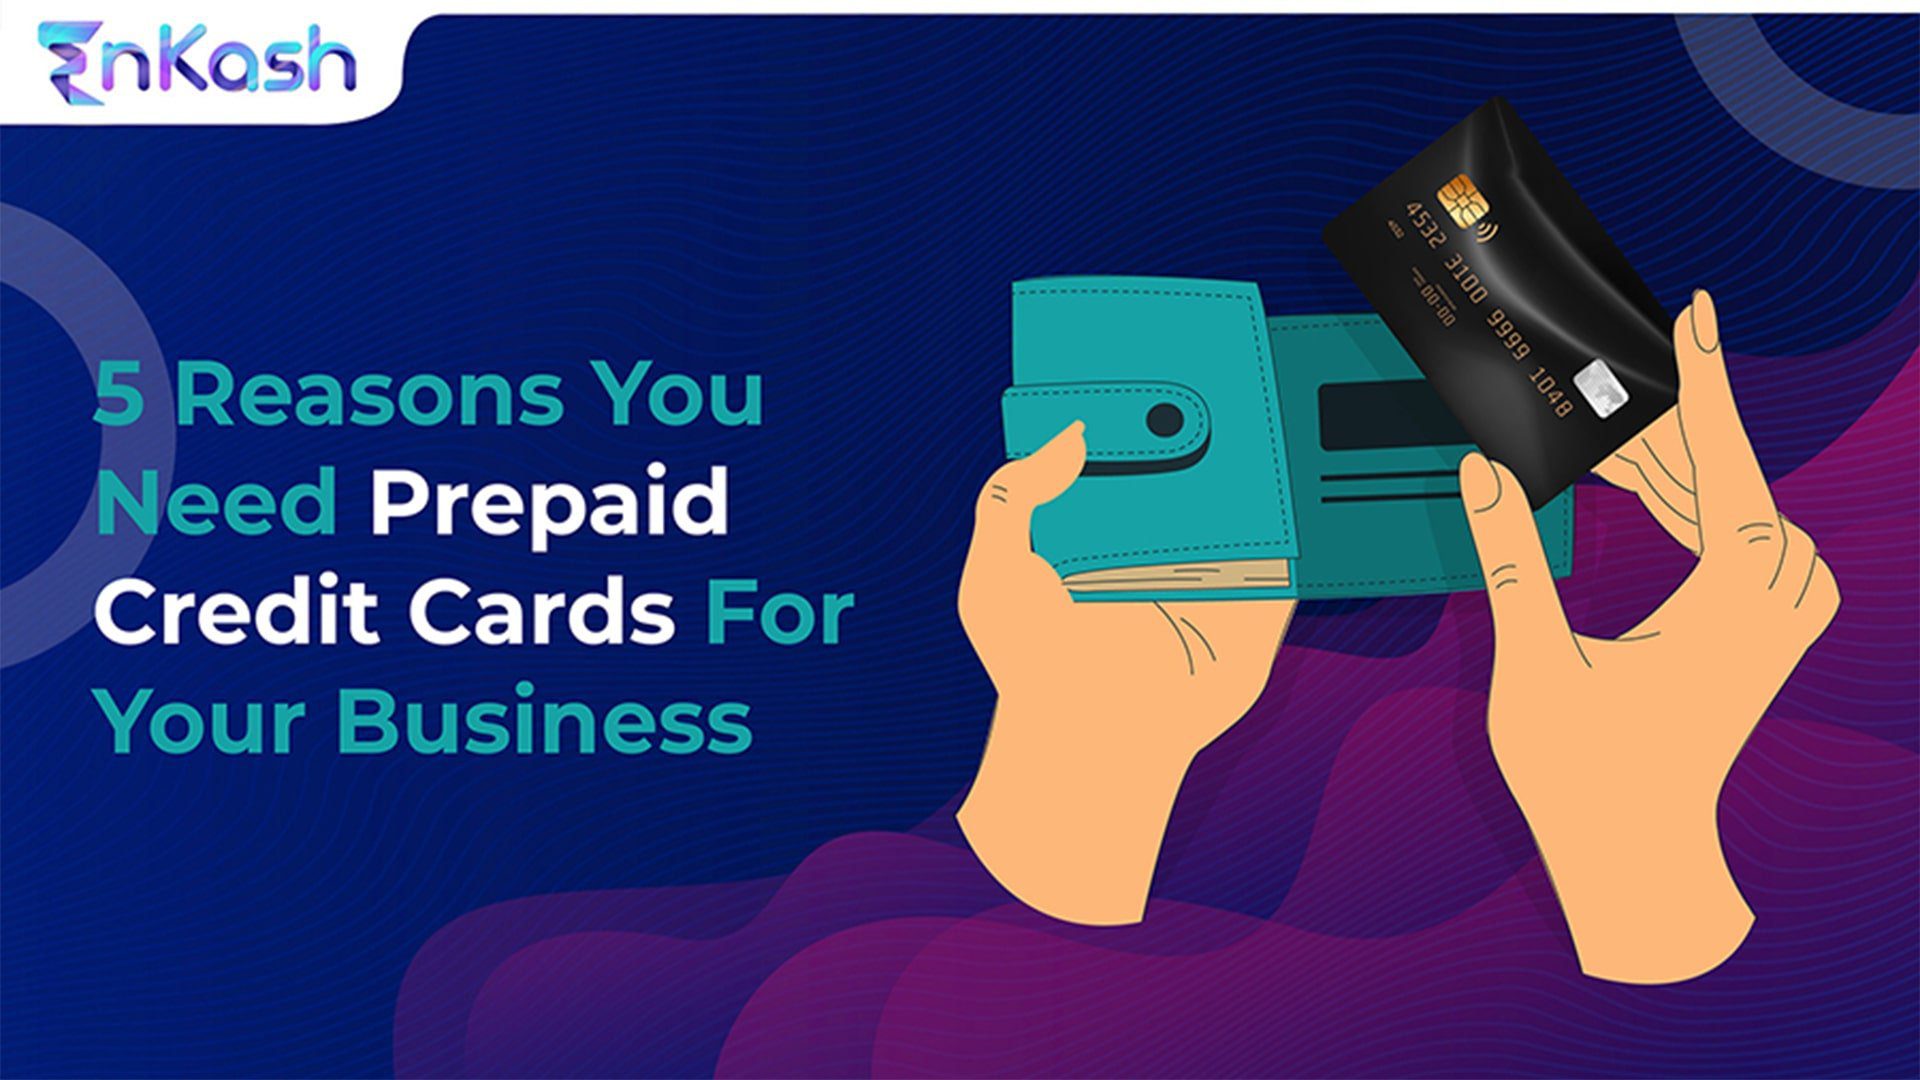 5 Reasons You Need Prepaid Credit Cards For Your Business